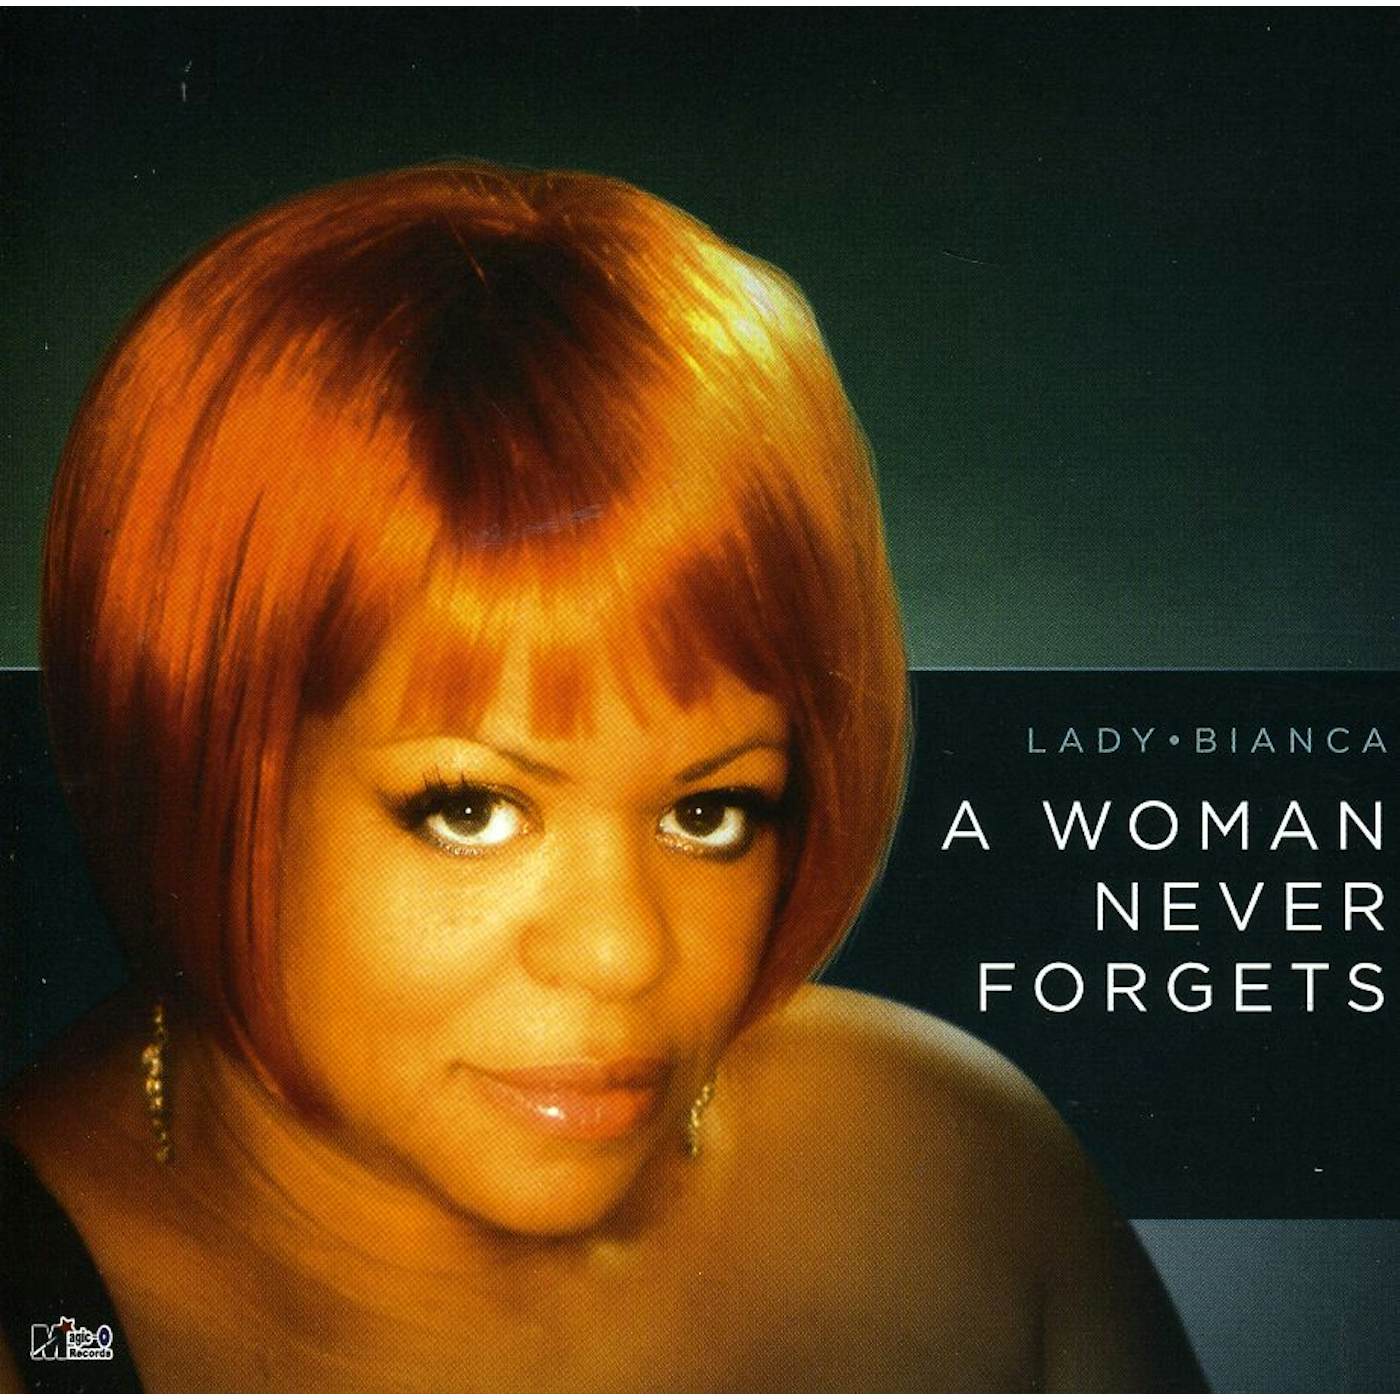 Lady Bianca WOMAN NEVER FORGETS CD